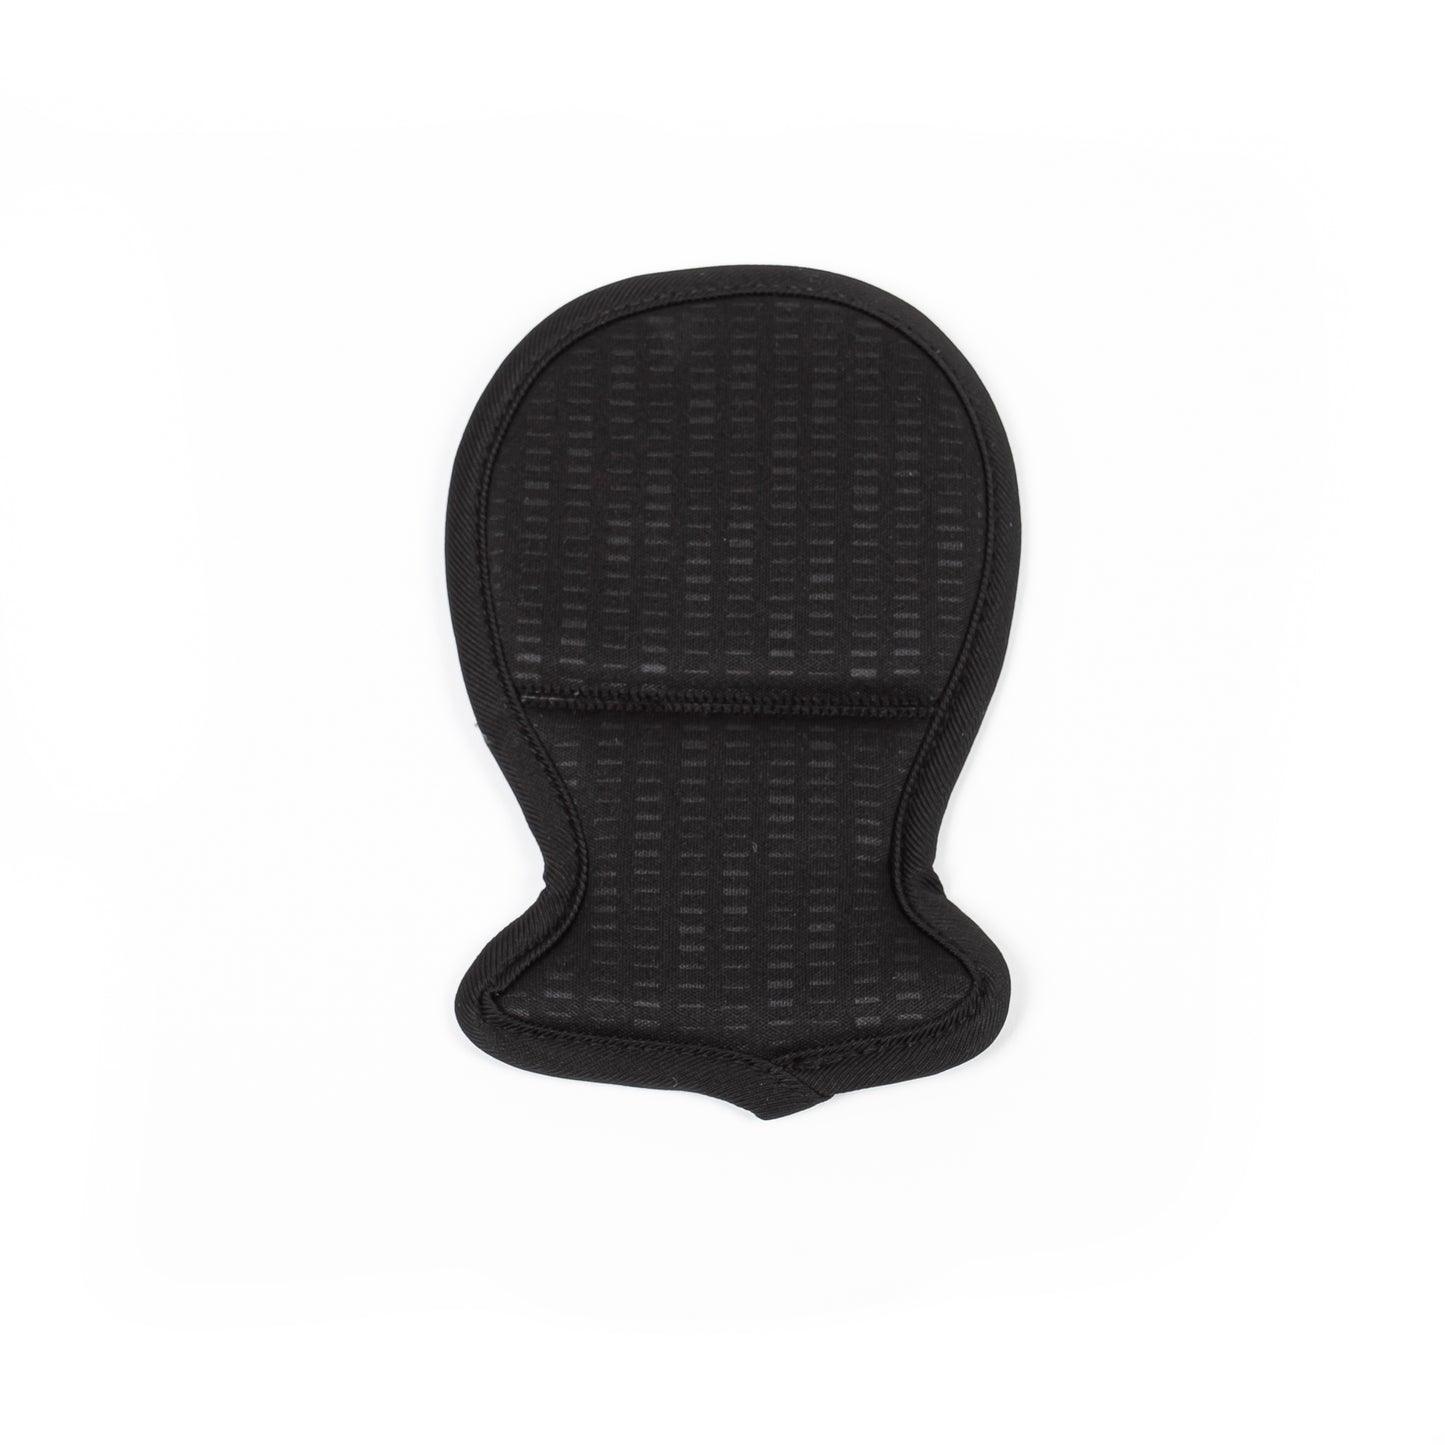 Revolve360 Convertible Replacement Crotch Buckle Cover Pad